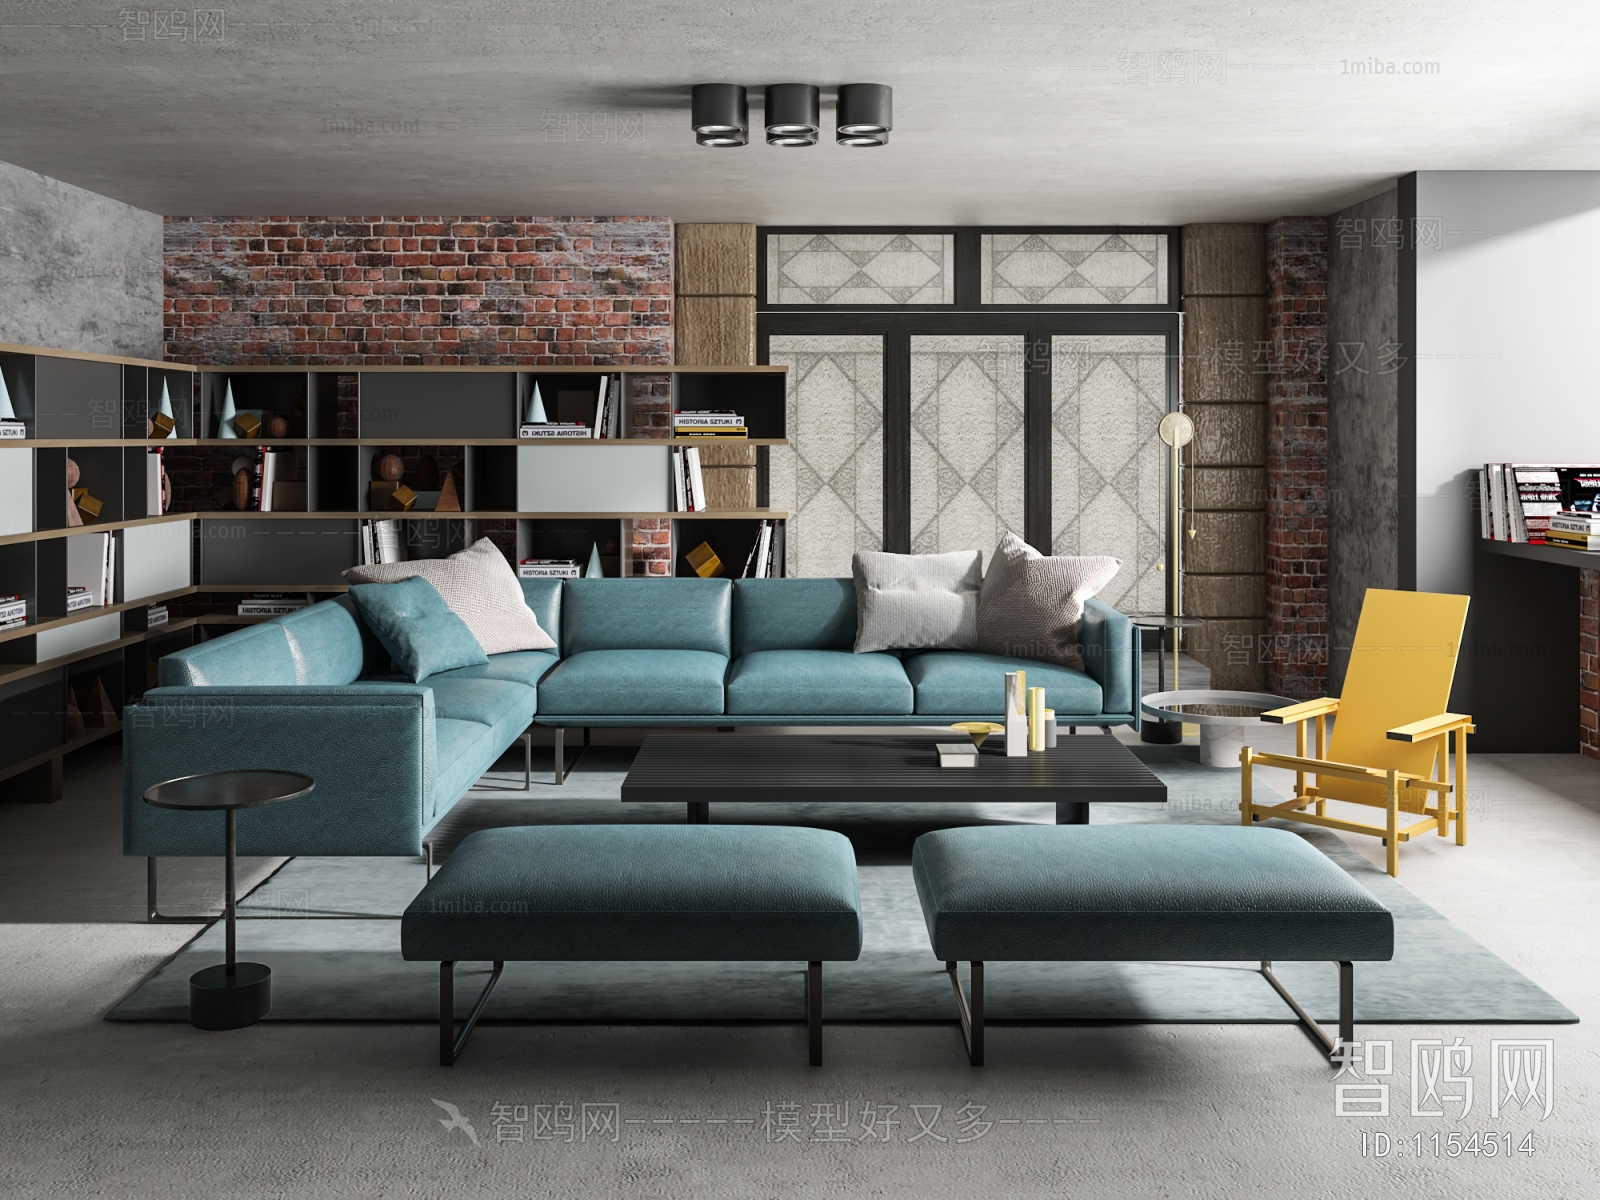 Industrial Style A Living Room